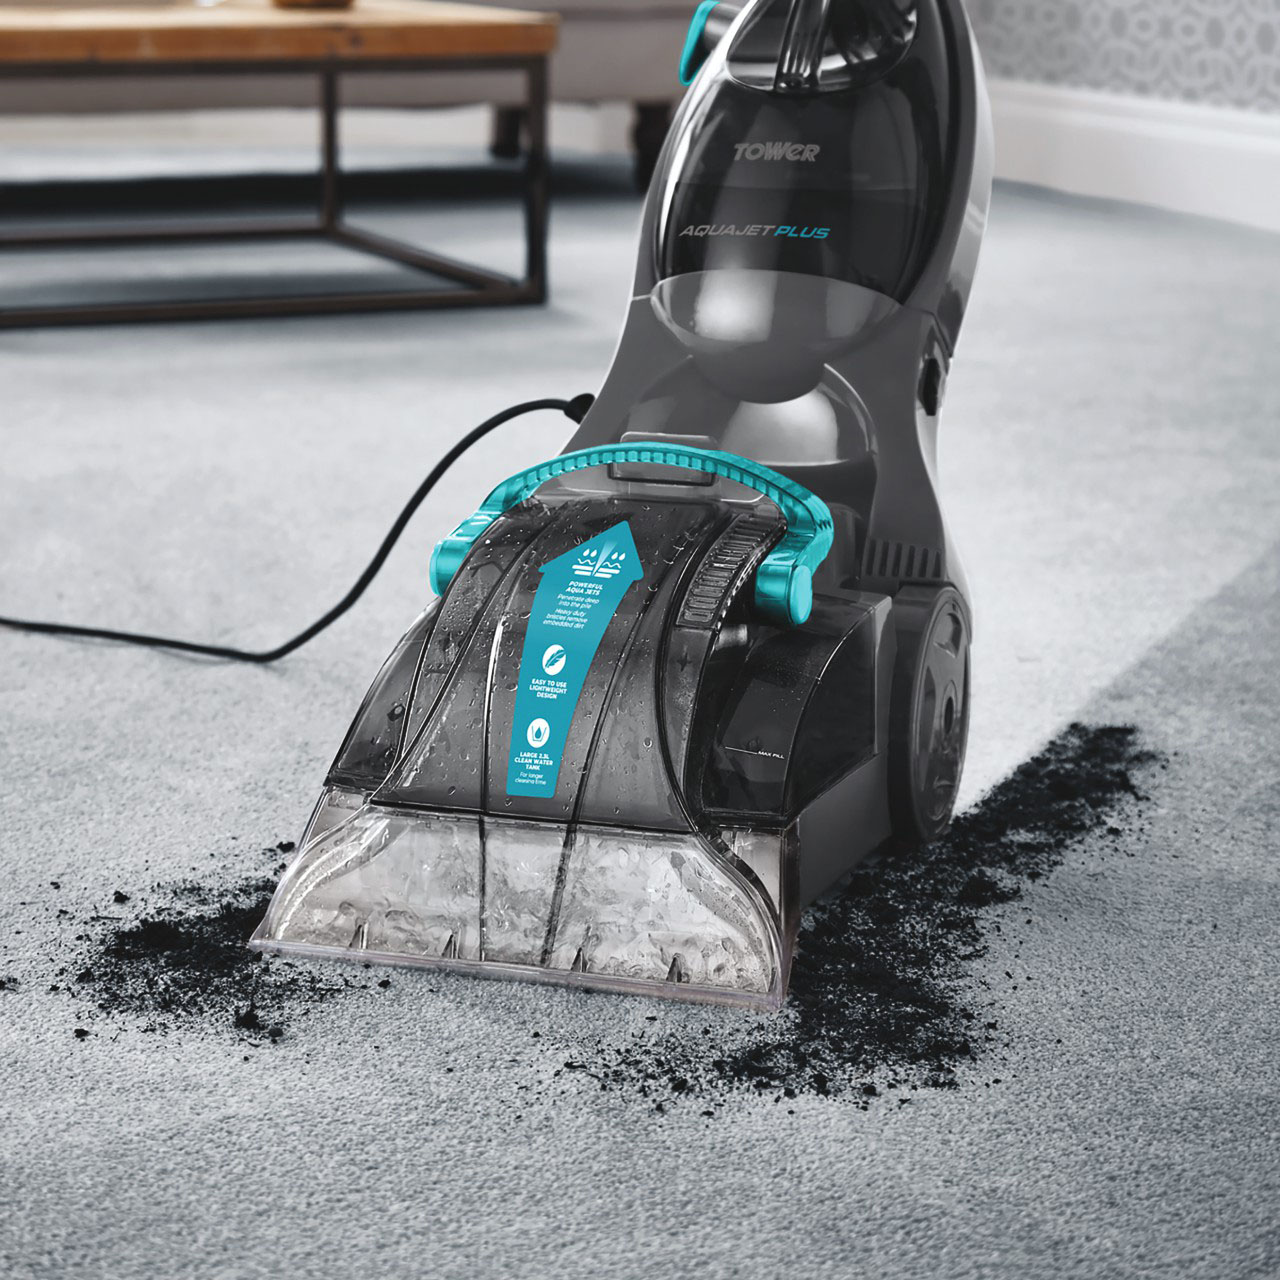 Tower Carpet Cleaner